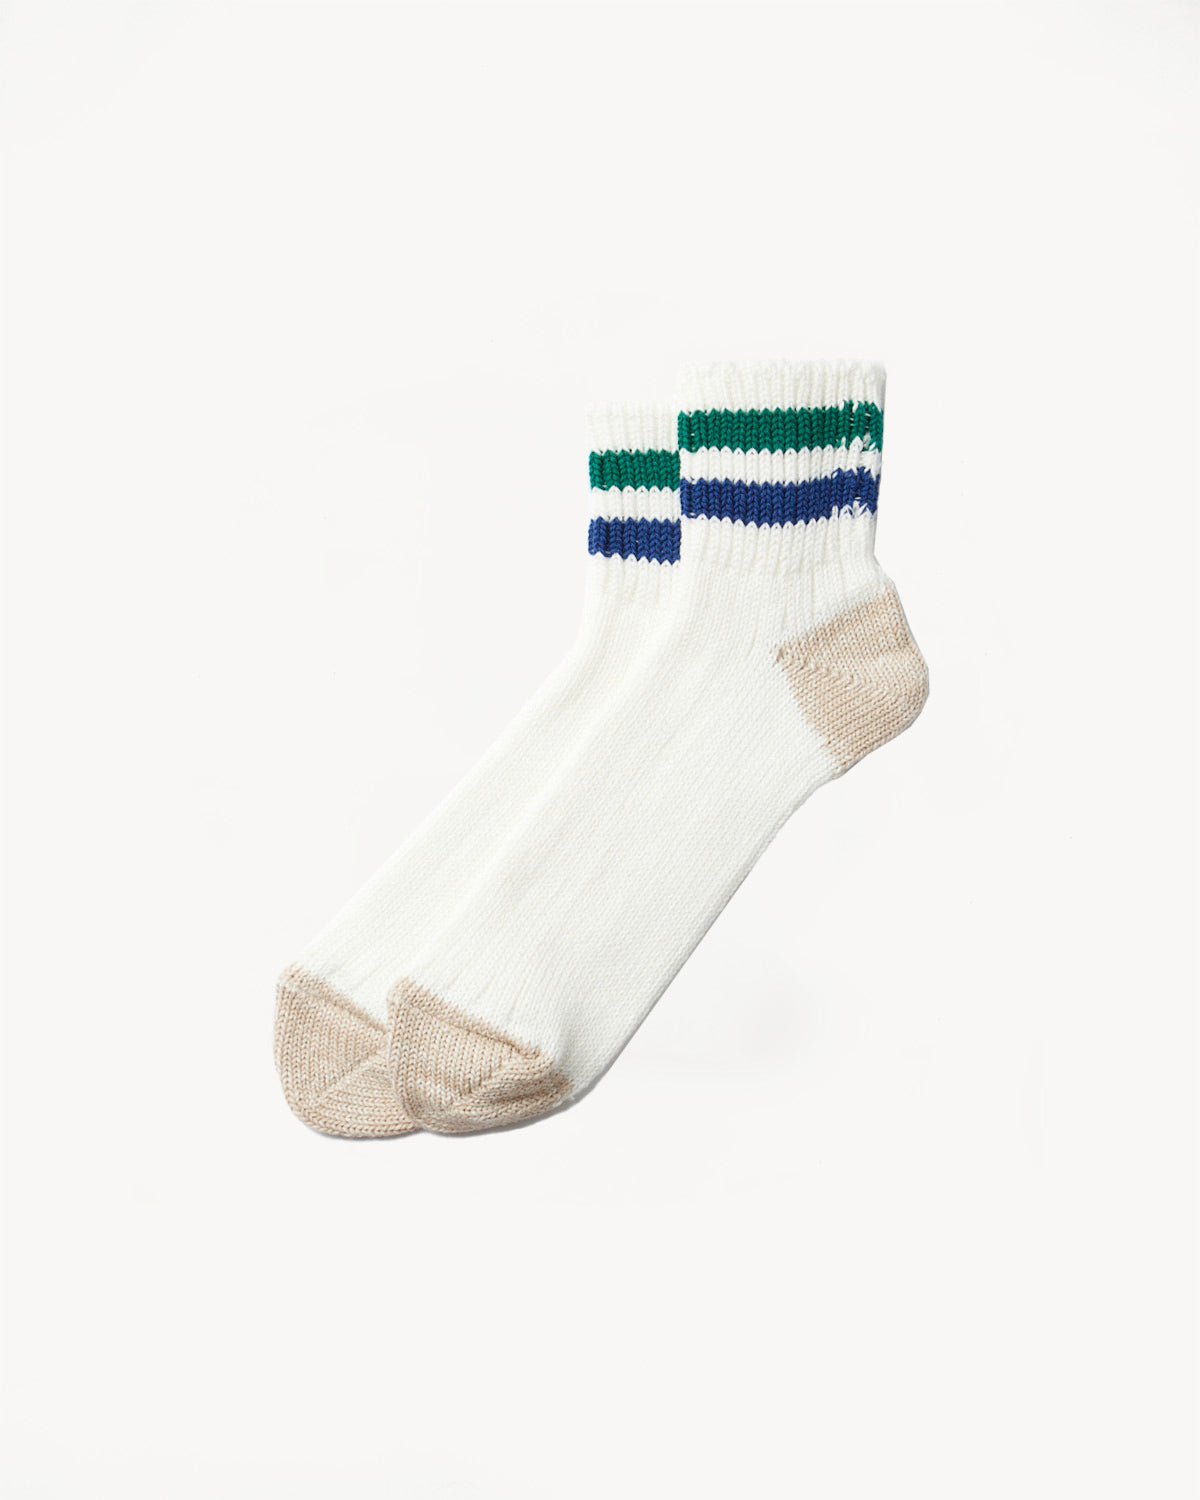 R1404 - Old School Ribbed Ankle Sock - White, Green, Deep Blue